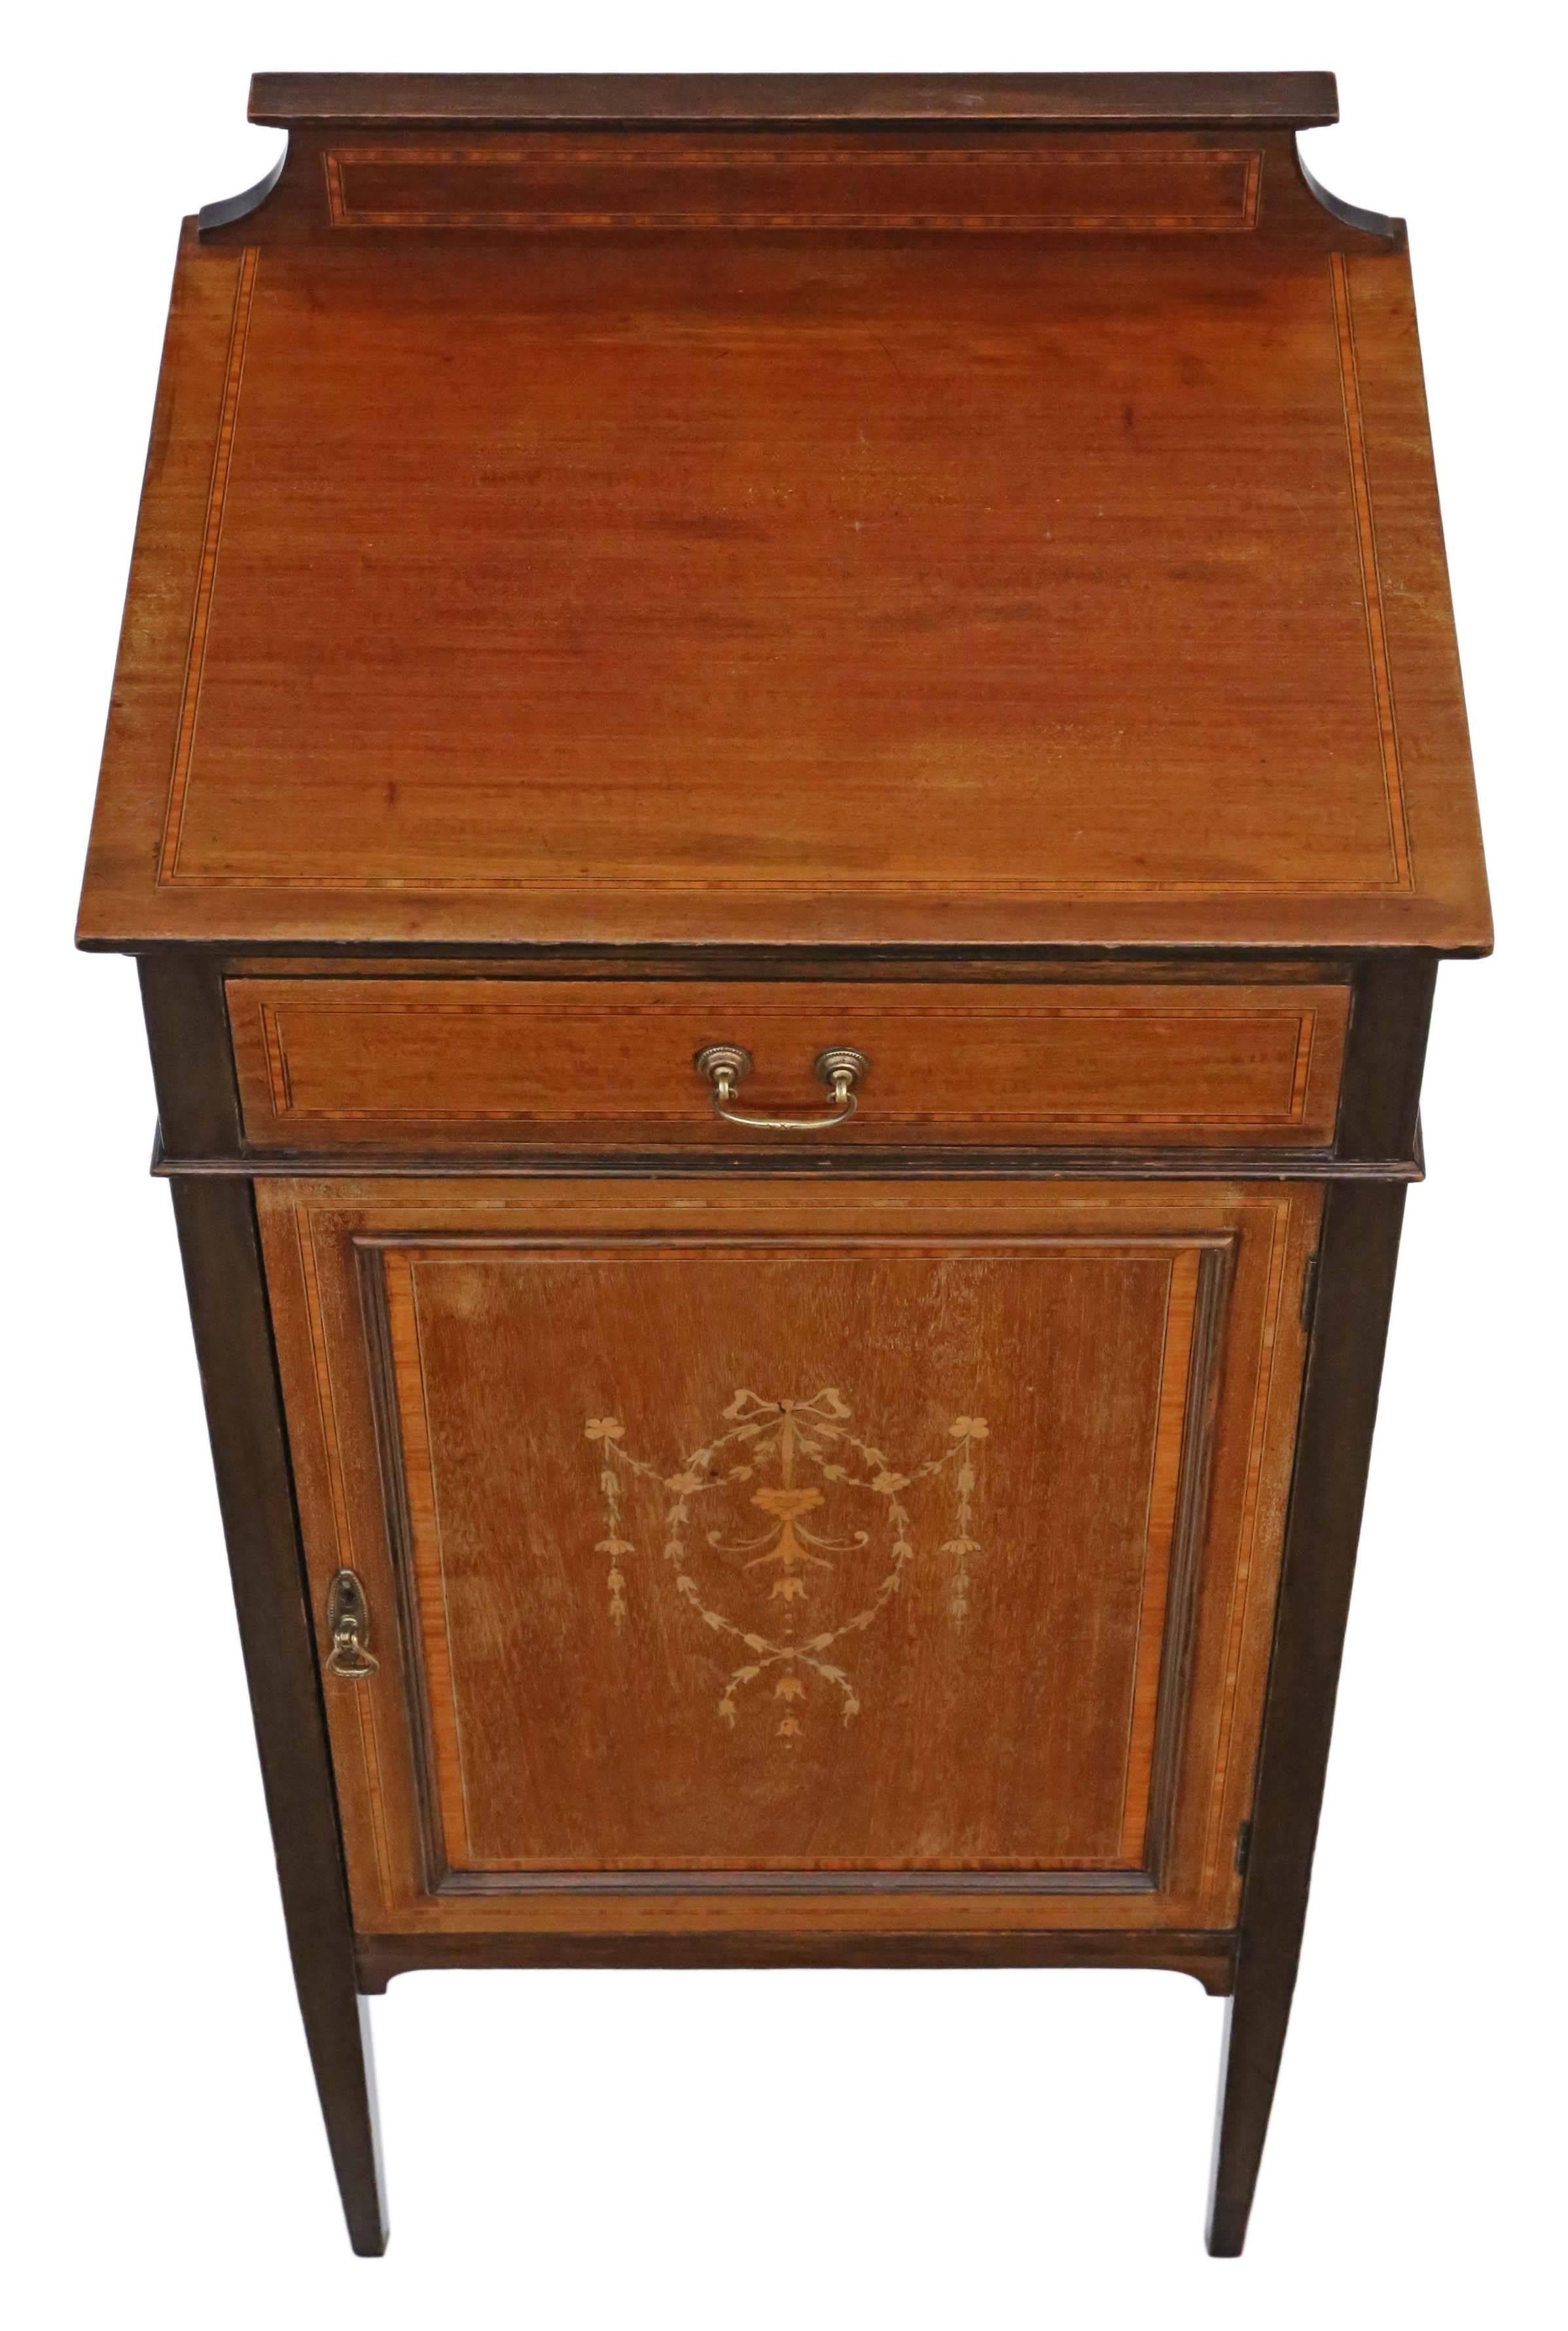 Antique Quality Edwardian Mahogany Music or Bedside Cabinet Table In Good Condition For Sale In Wisbech, Walton Wisbech